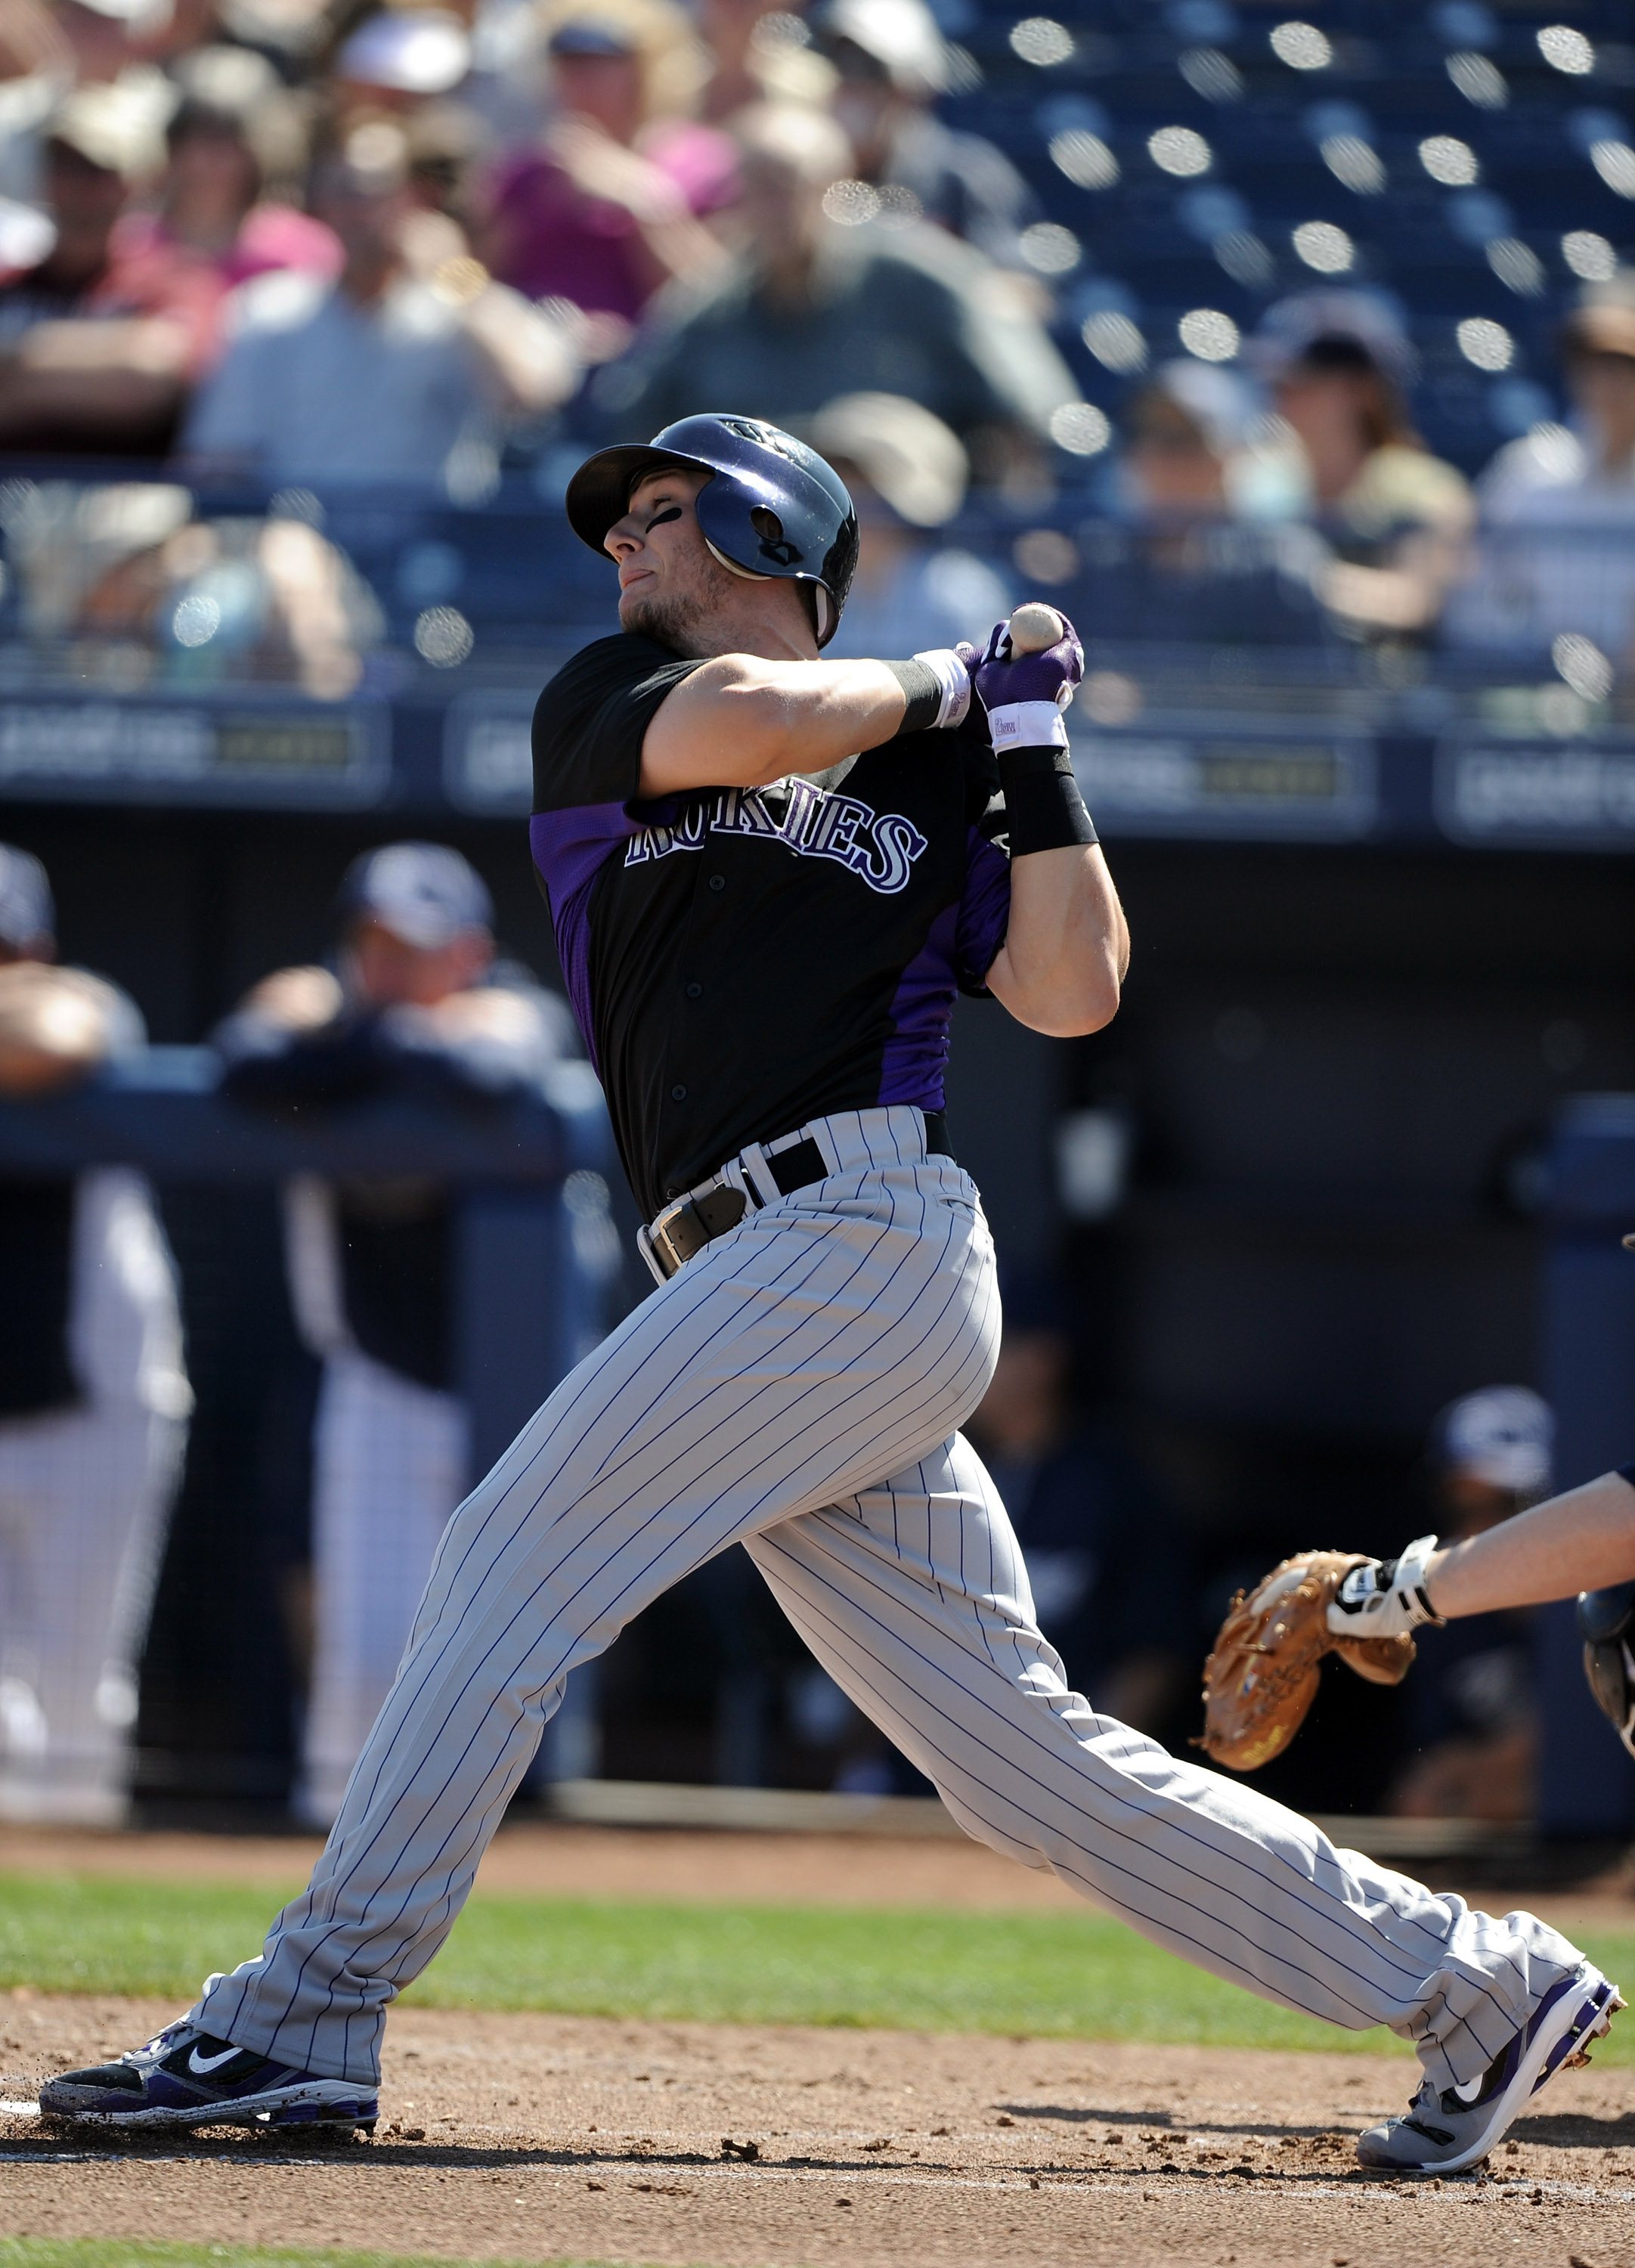 PEORIA, AZ - MARCH 02:  Troy Tulowitzki #2 of the Colorado Rockies at bat against the San Diego Padres during spring training at Peoria Stadium on March 2, 2011 in Peoria, Arizona.  (Photo by Harry How/Getty Images)